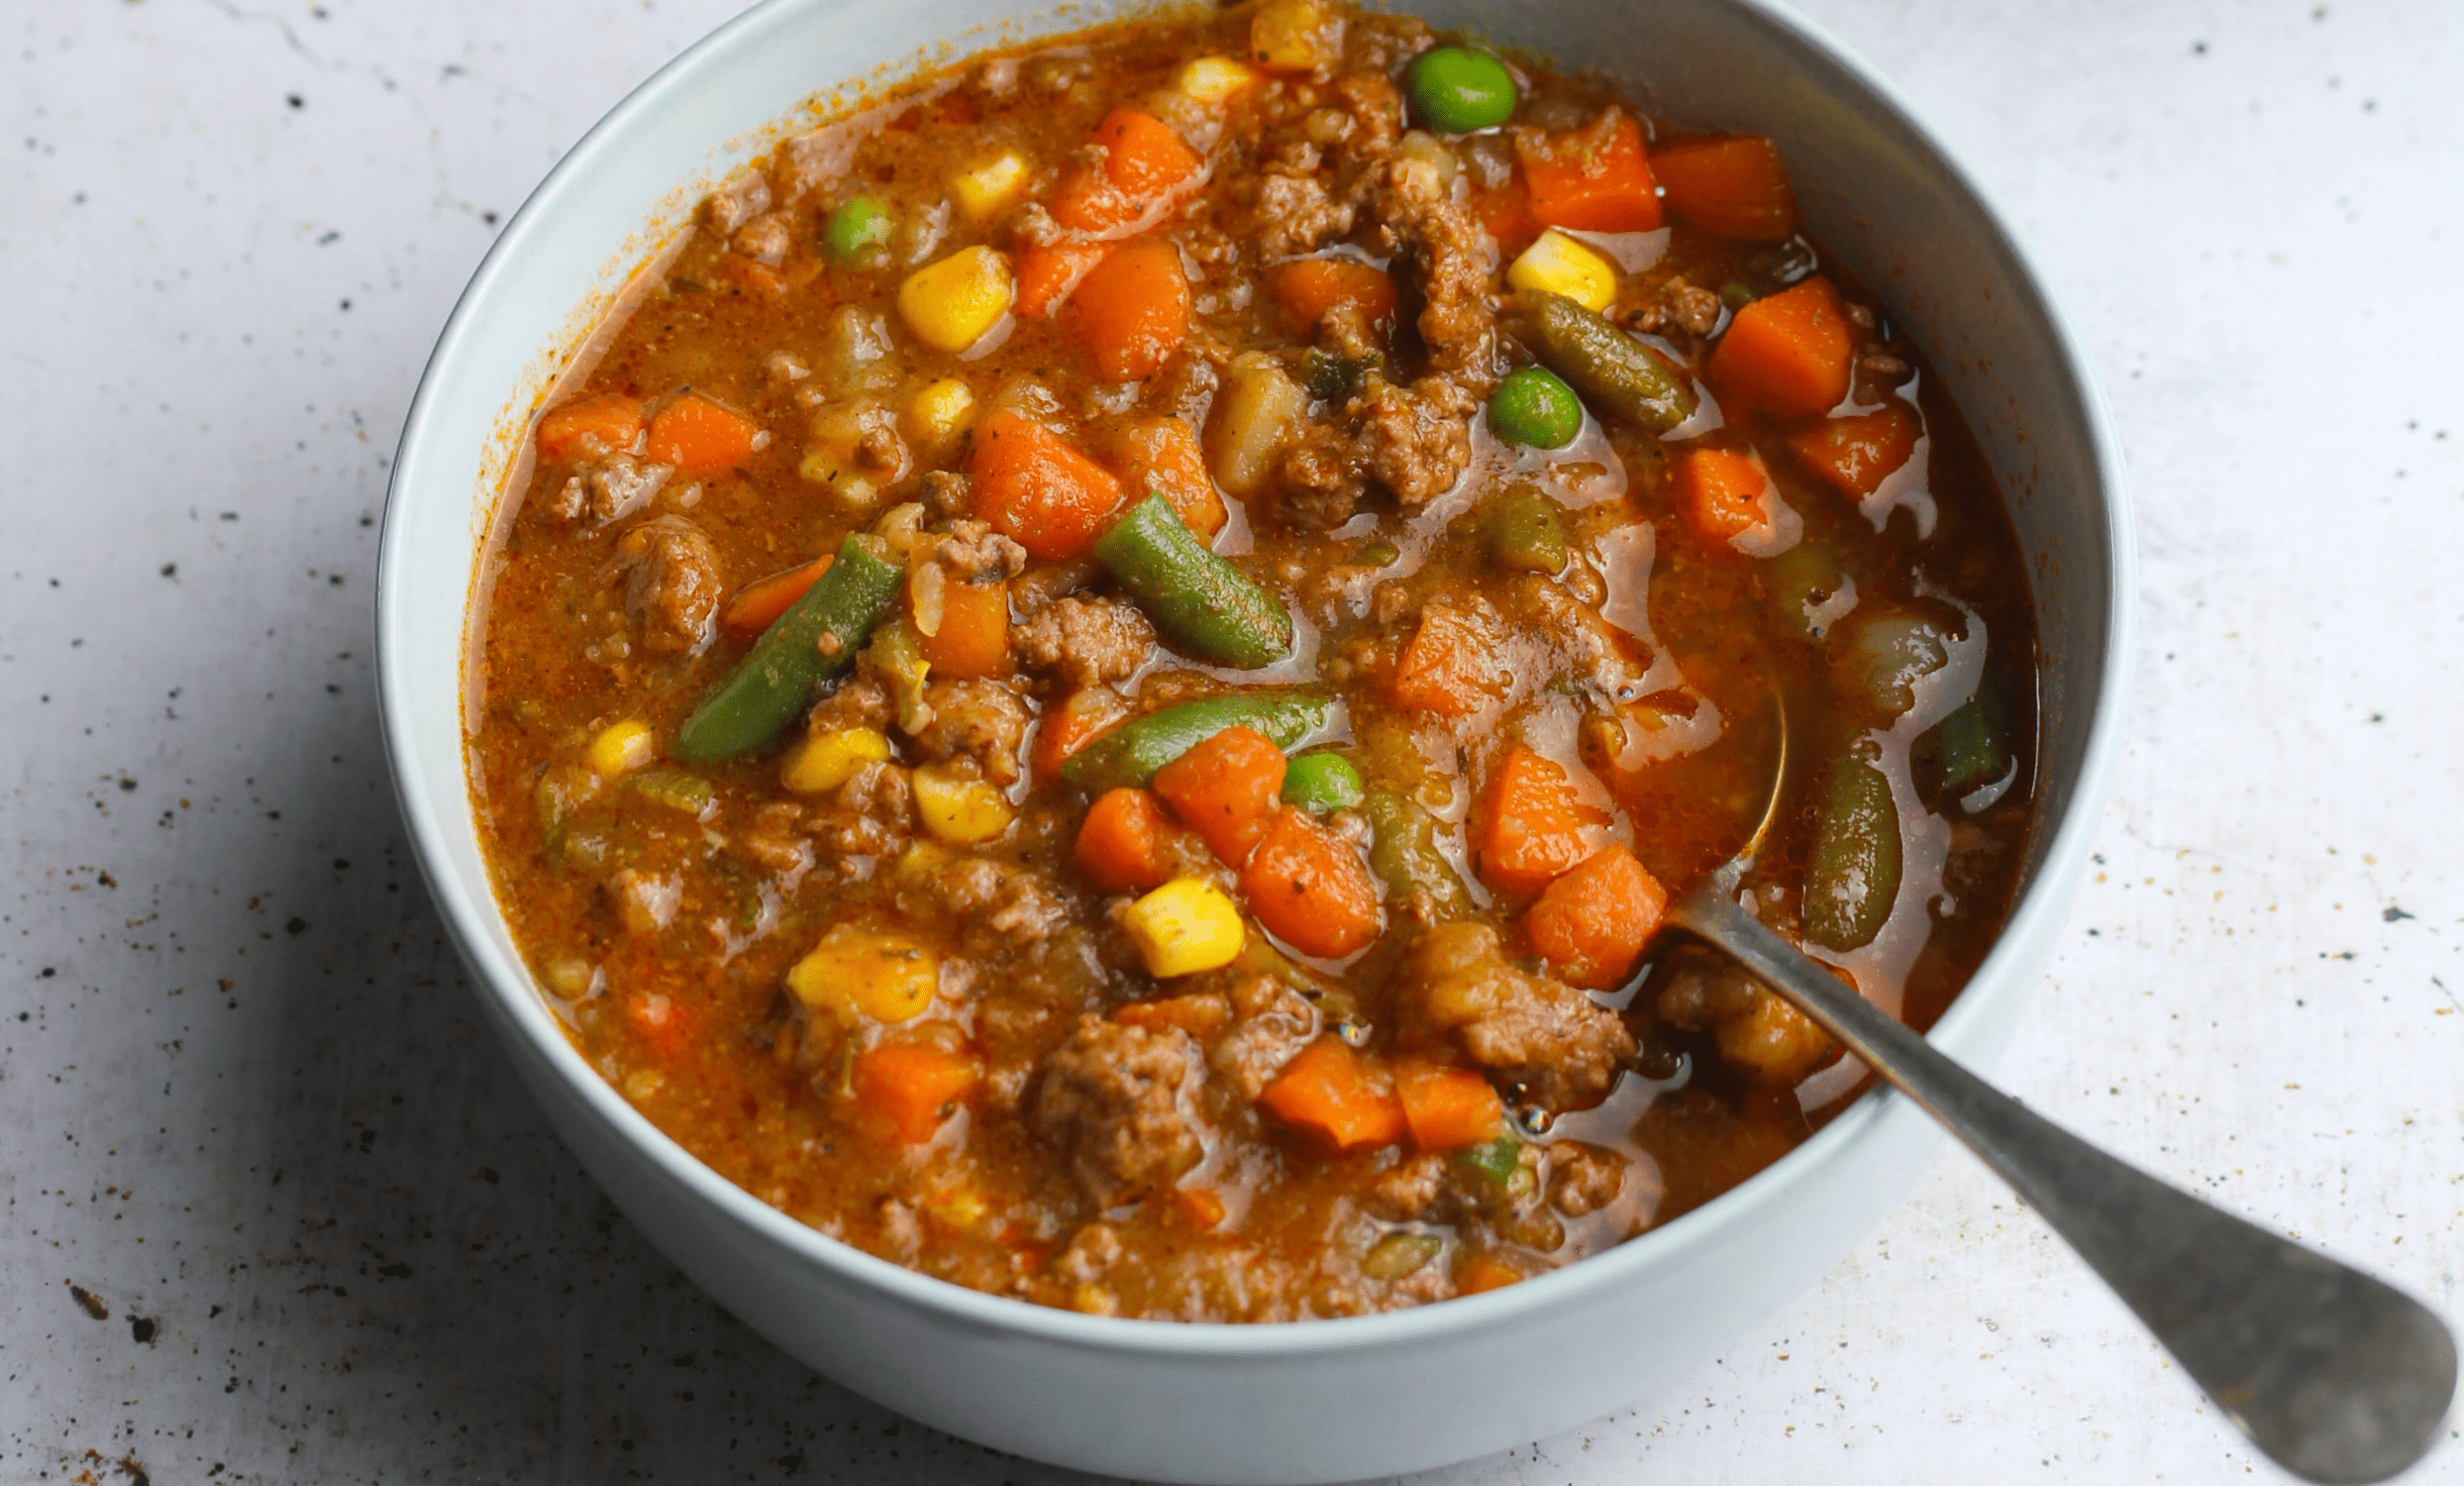 Hearty Chilli Beef and Veg Soup